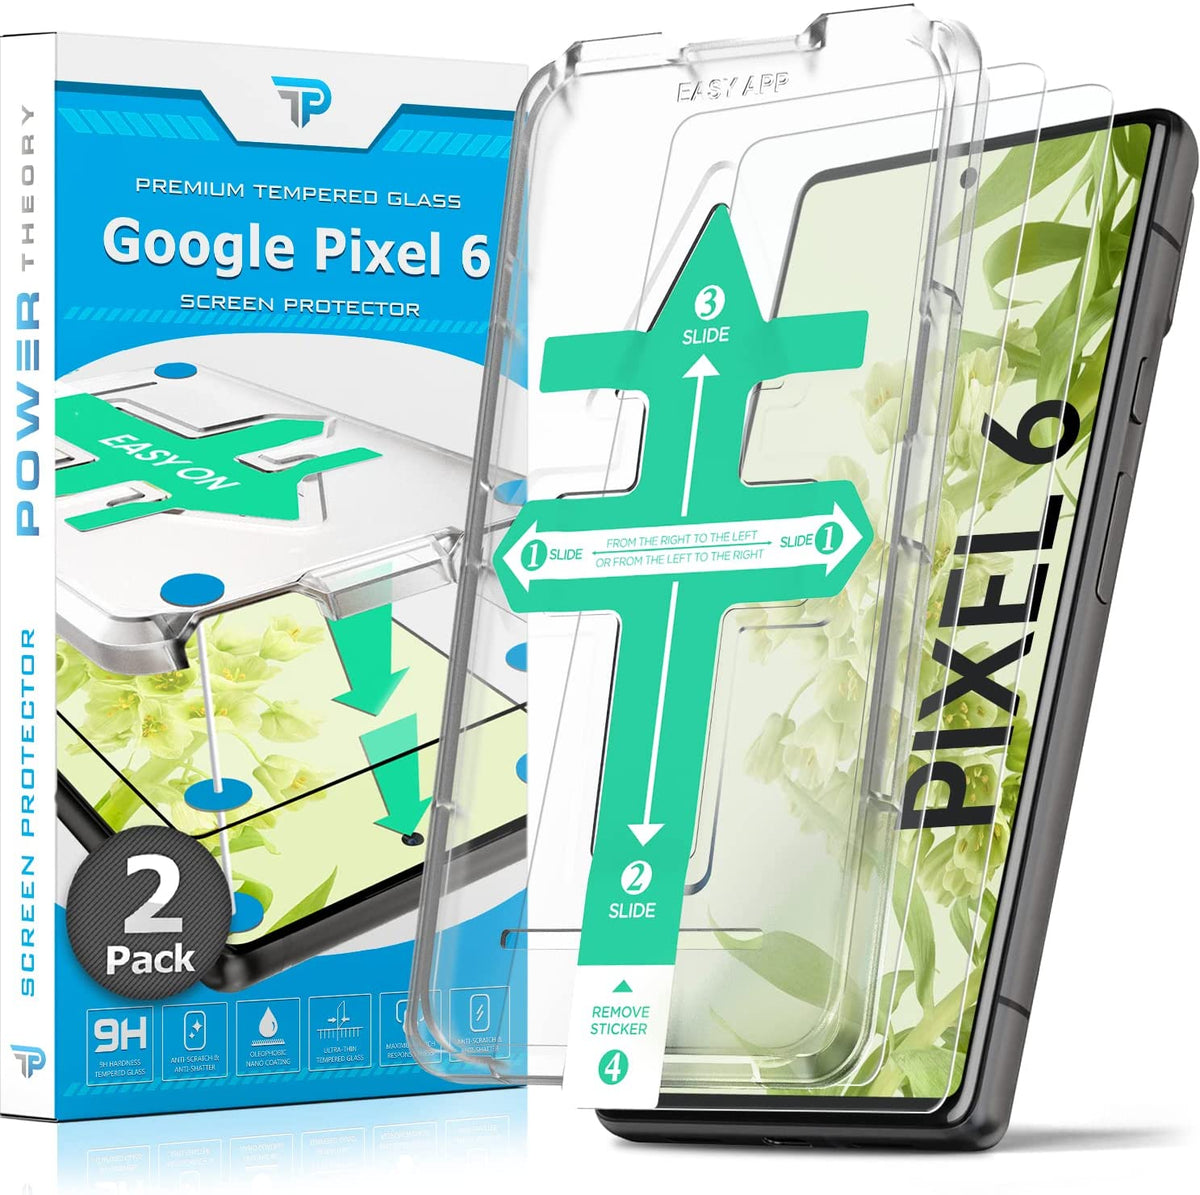 Google Pixel 6 Tempered Glass Screen Protector [2-Pack] Cover